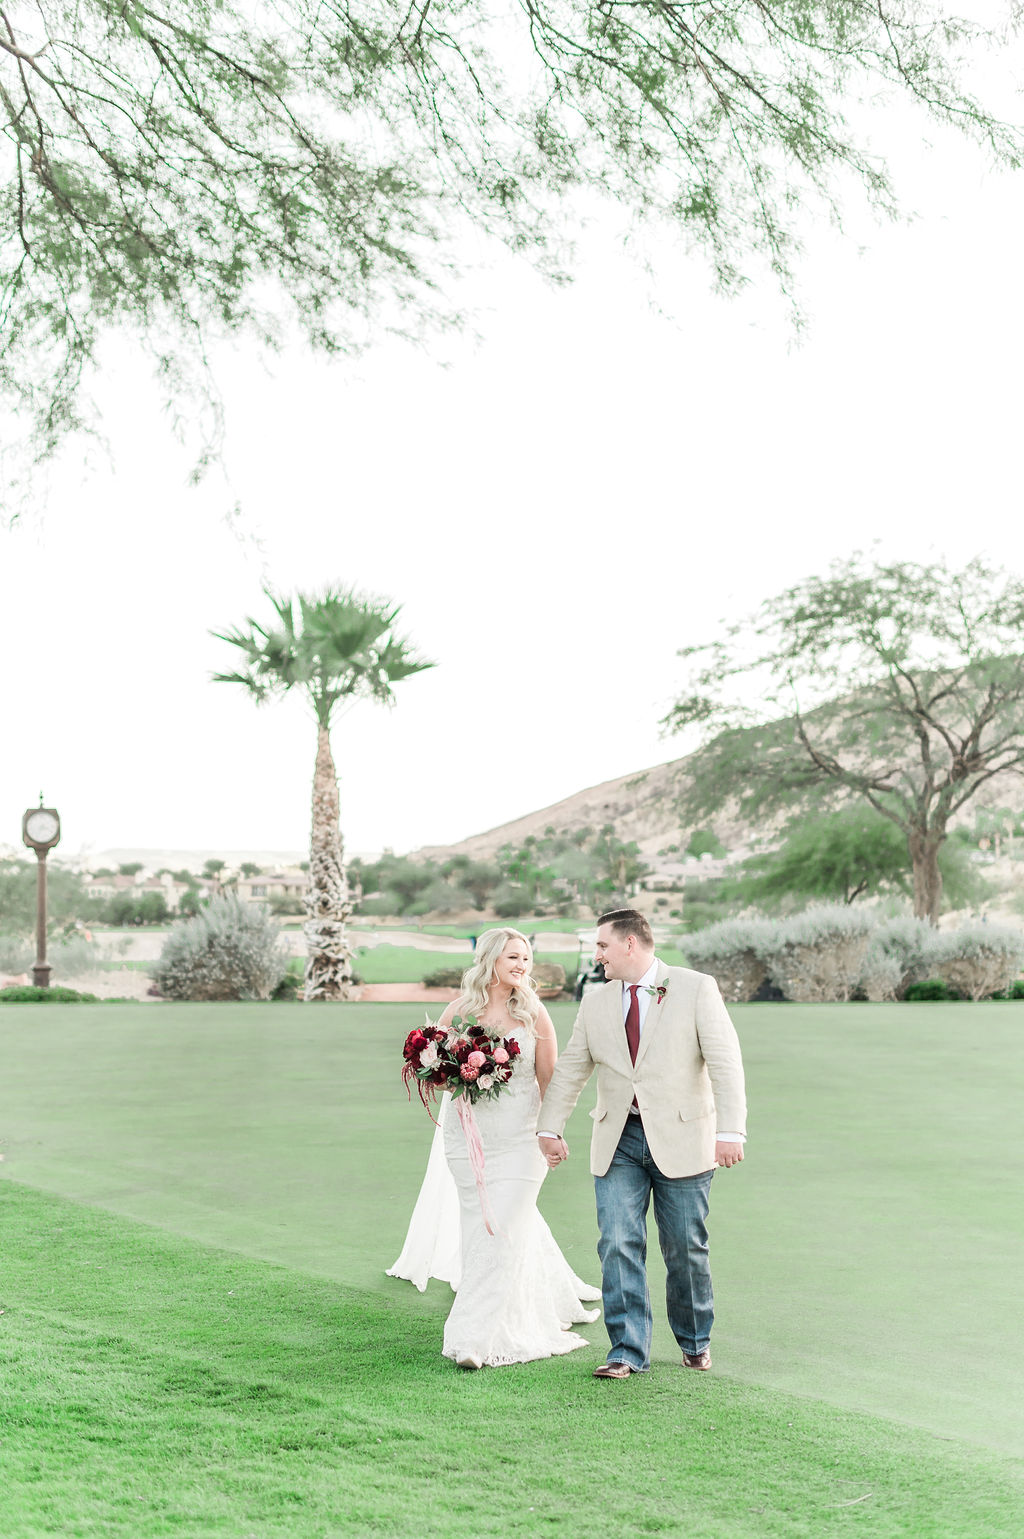 Bride and groom smiling at each other as they hold hands during their shoot arranged by Elopement Las Vegas